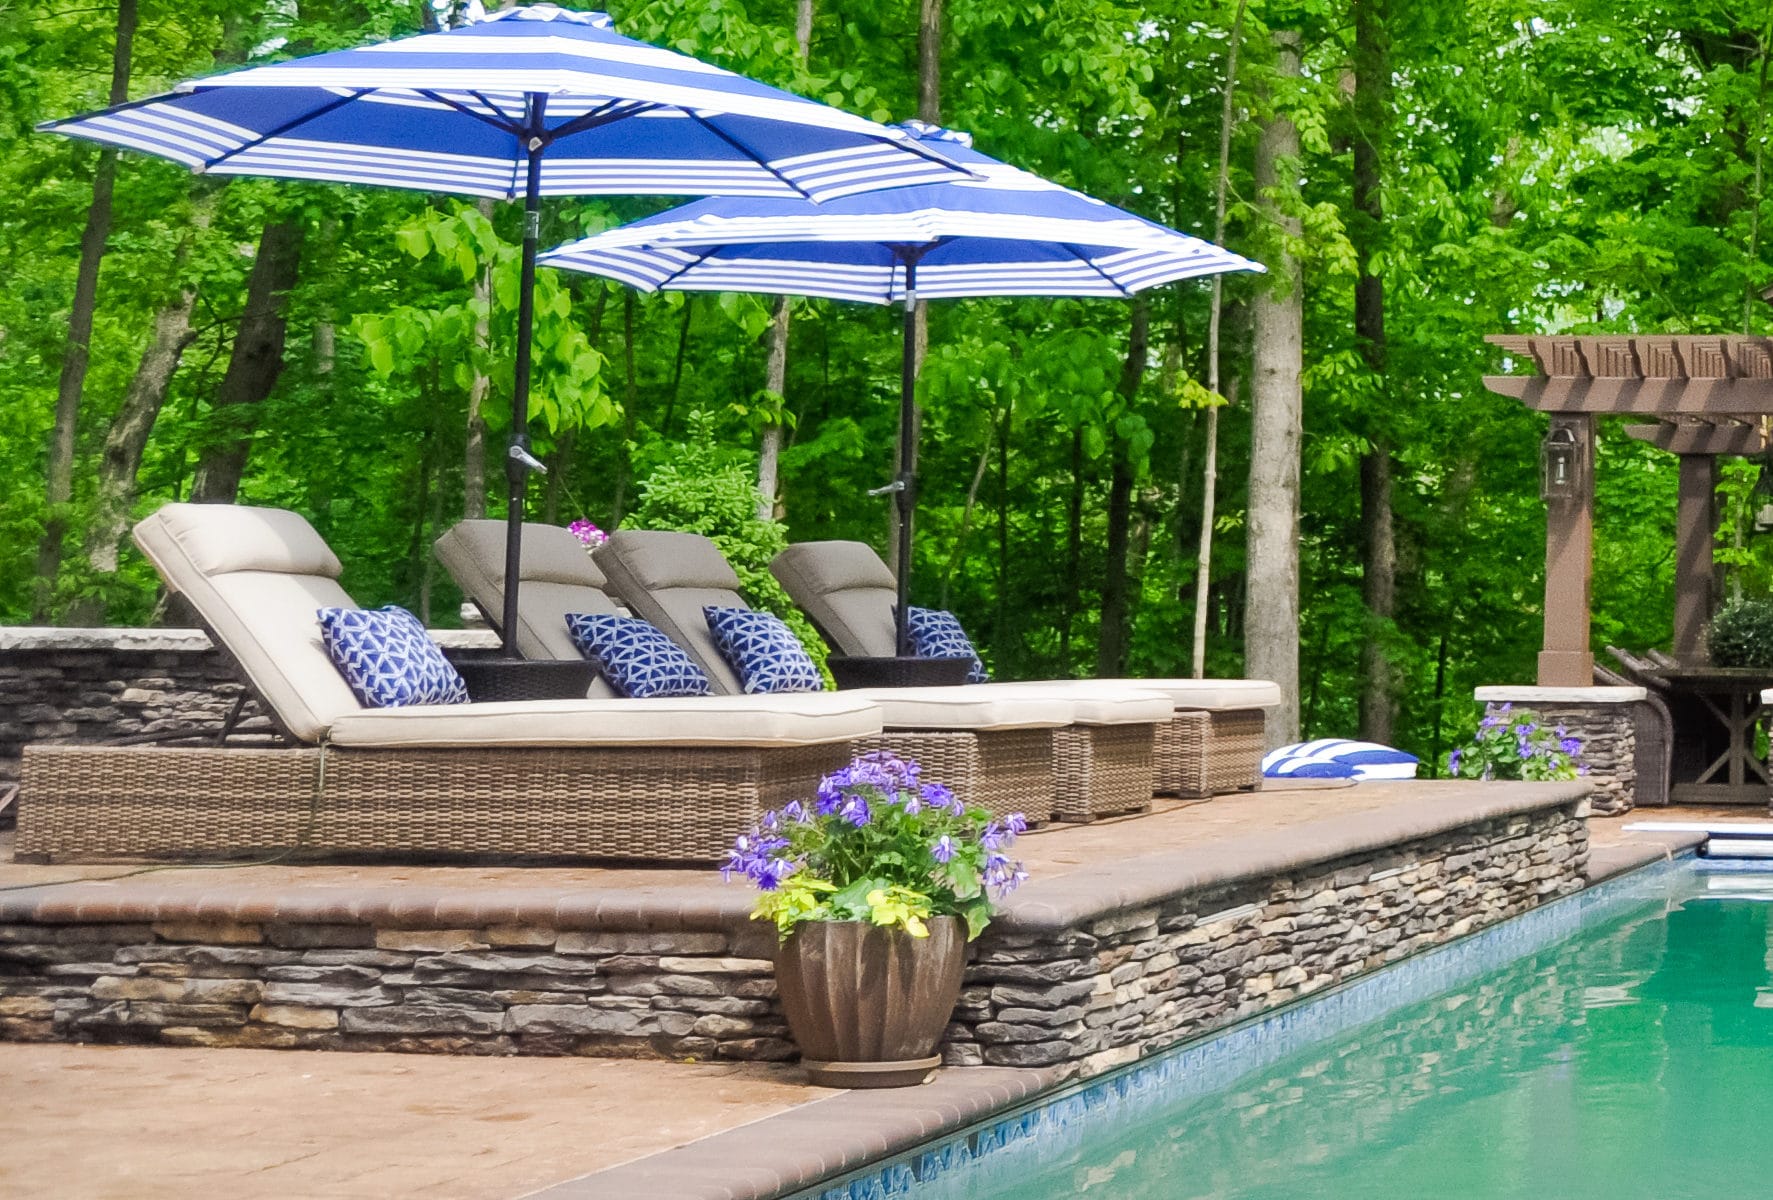 Precision Outdoors Avon patio & structure specialty built a-frame textured fireplace chimney pergola inspired structure decor additional seating raised sundeck tanning relaxation stamped concrete patio wrap around seating wall aesthetic style stone steps outdoor elements Avon indiana dream backyard pool